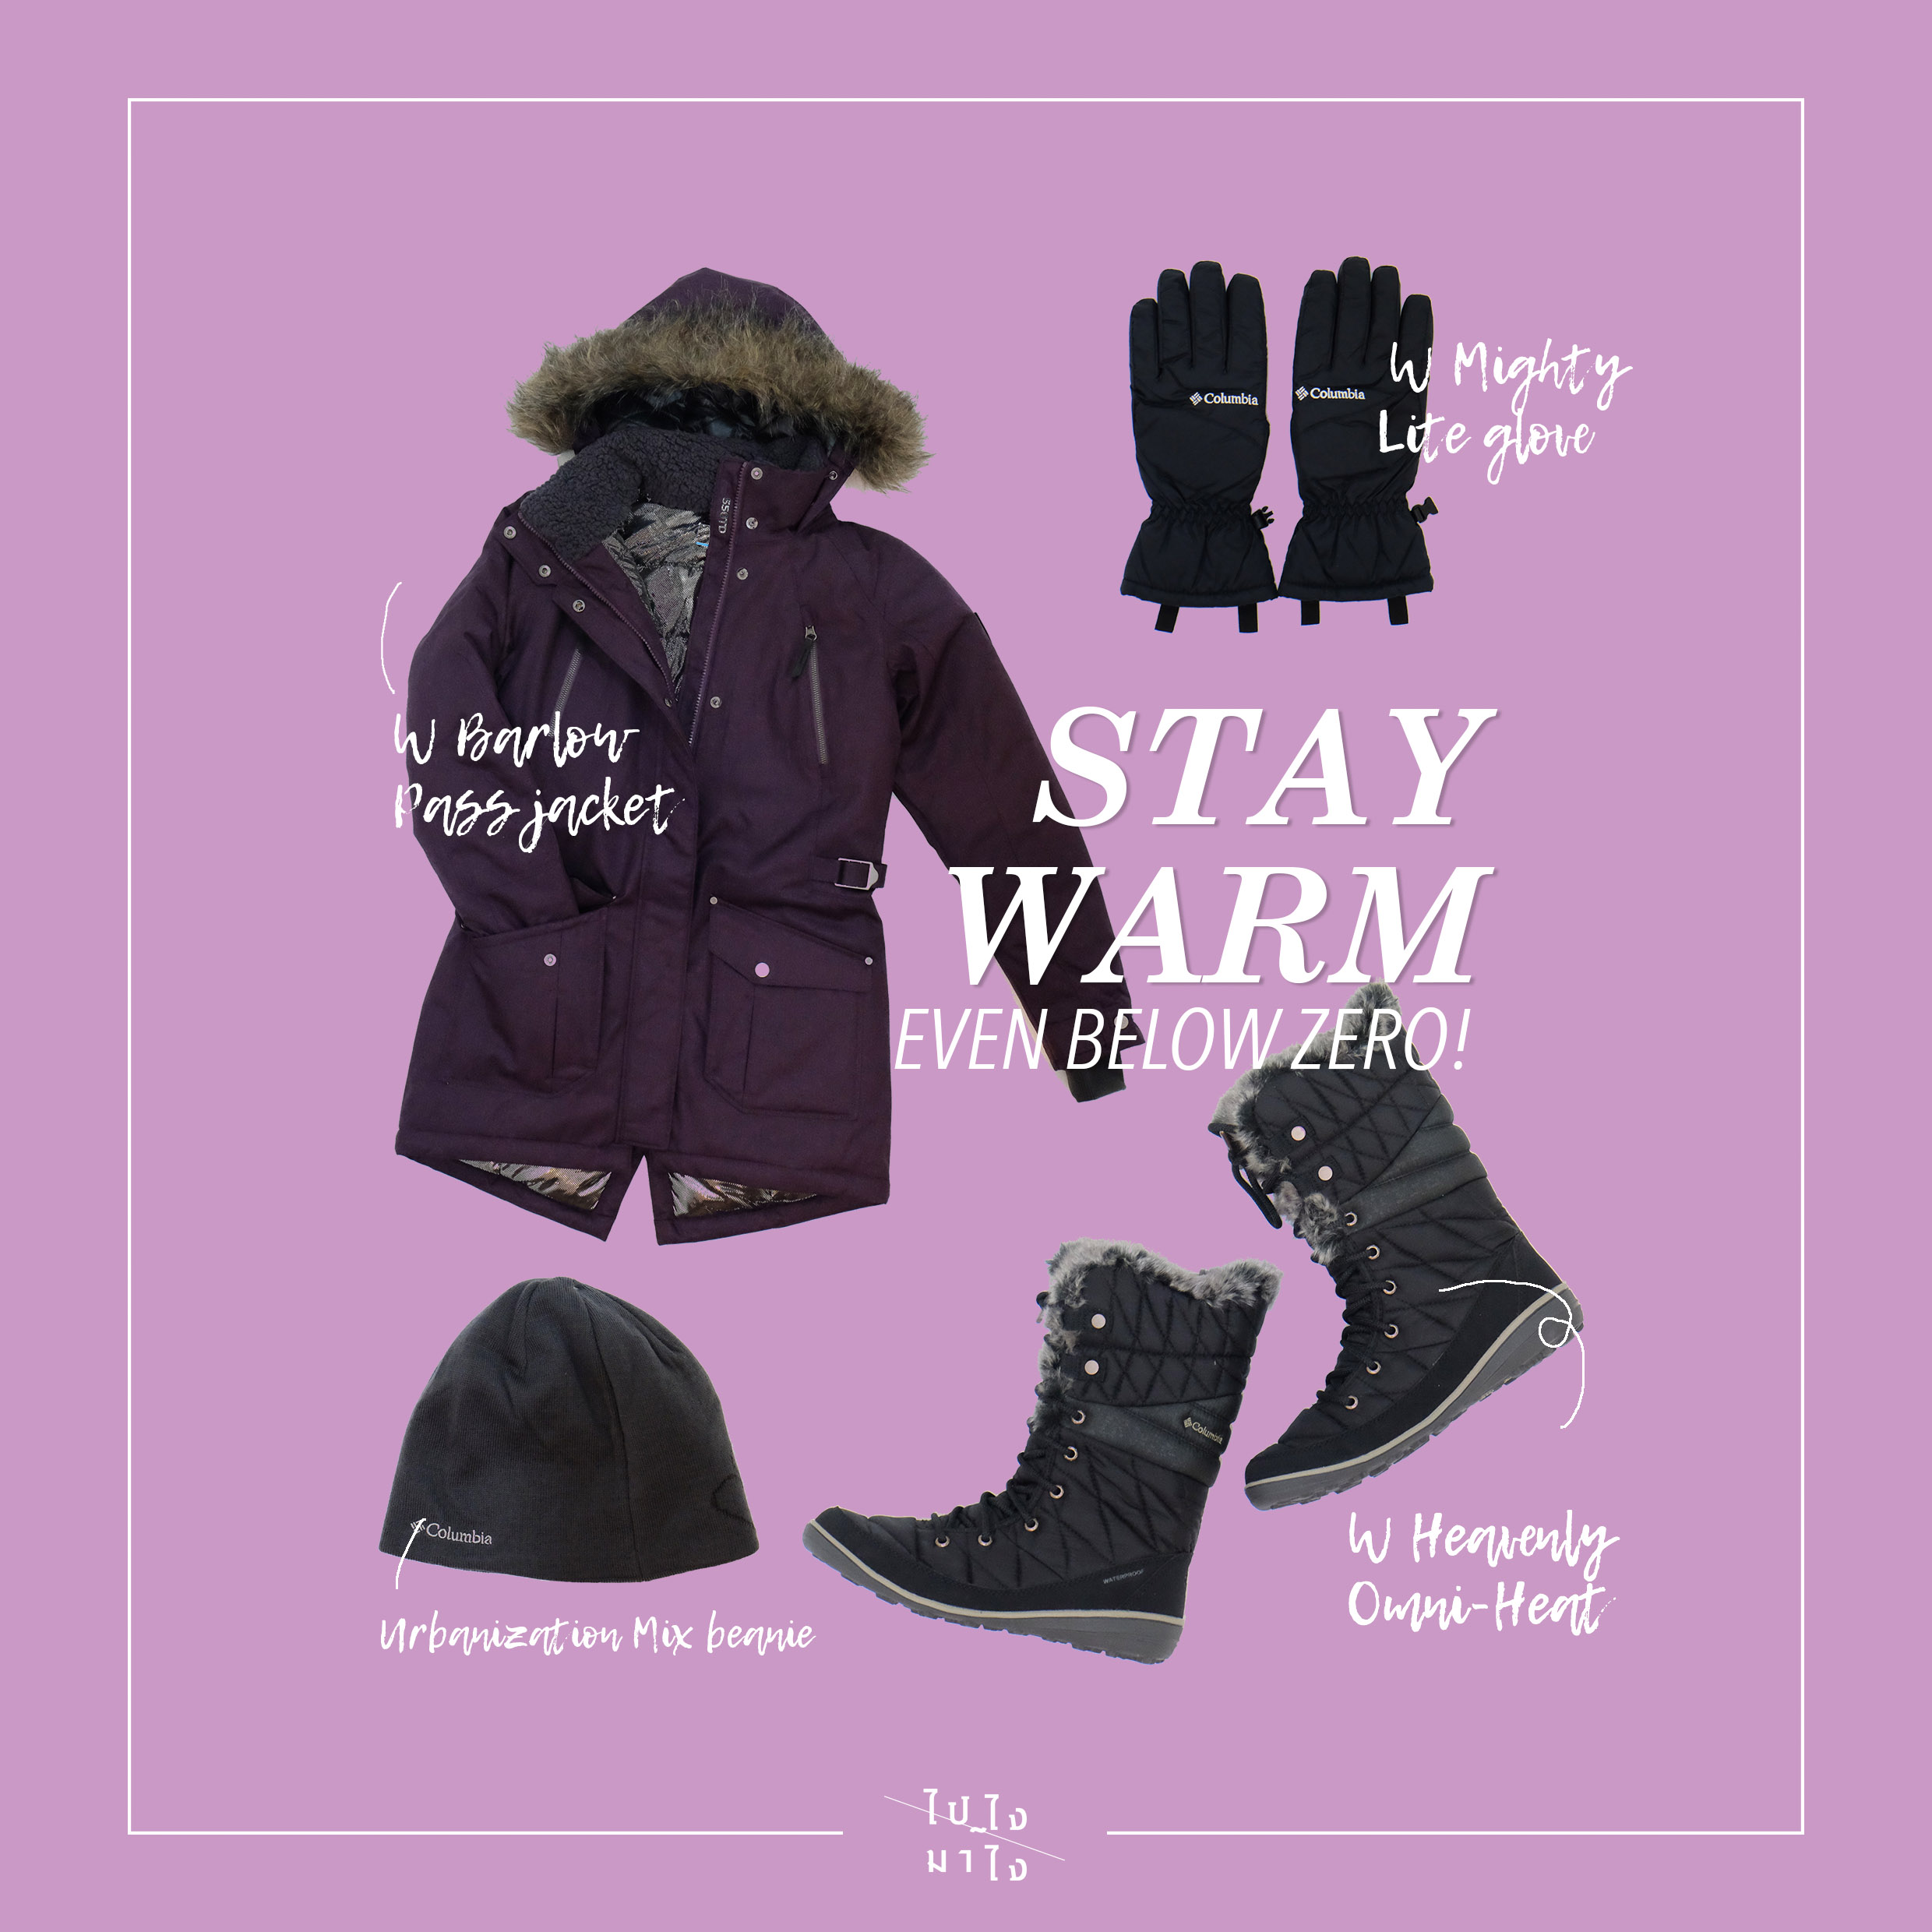 Stay warm, in the coldest winter!